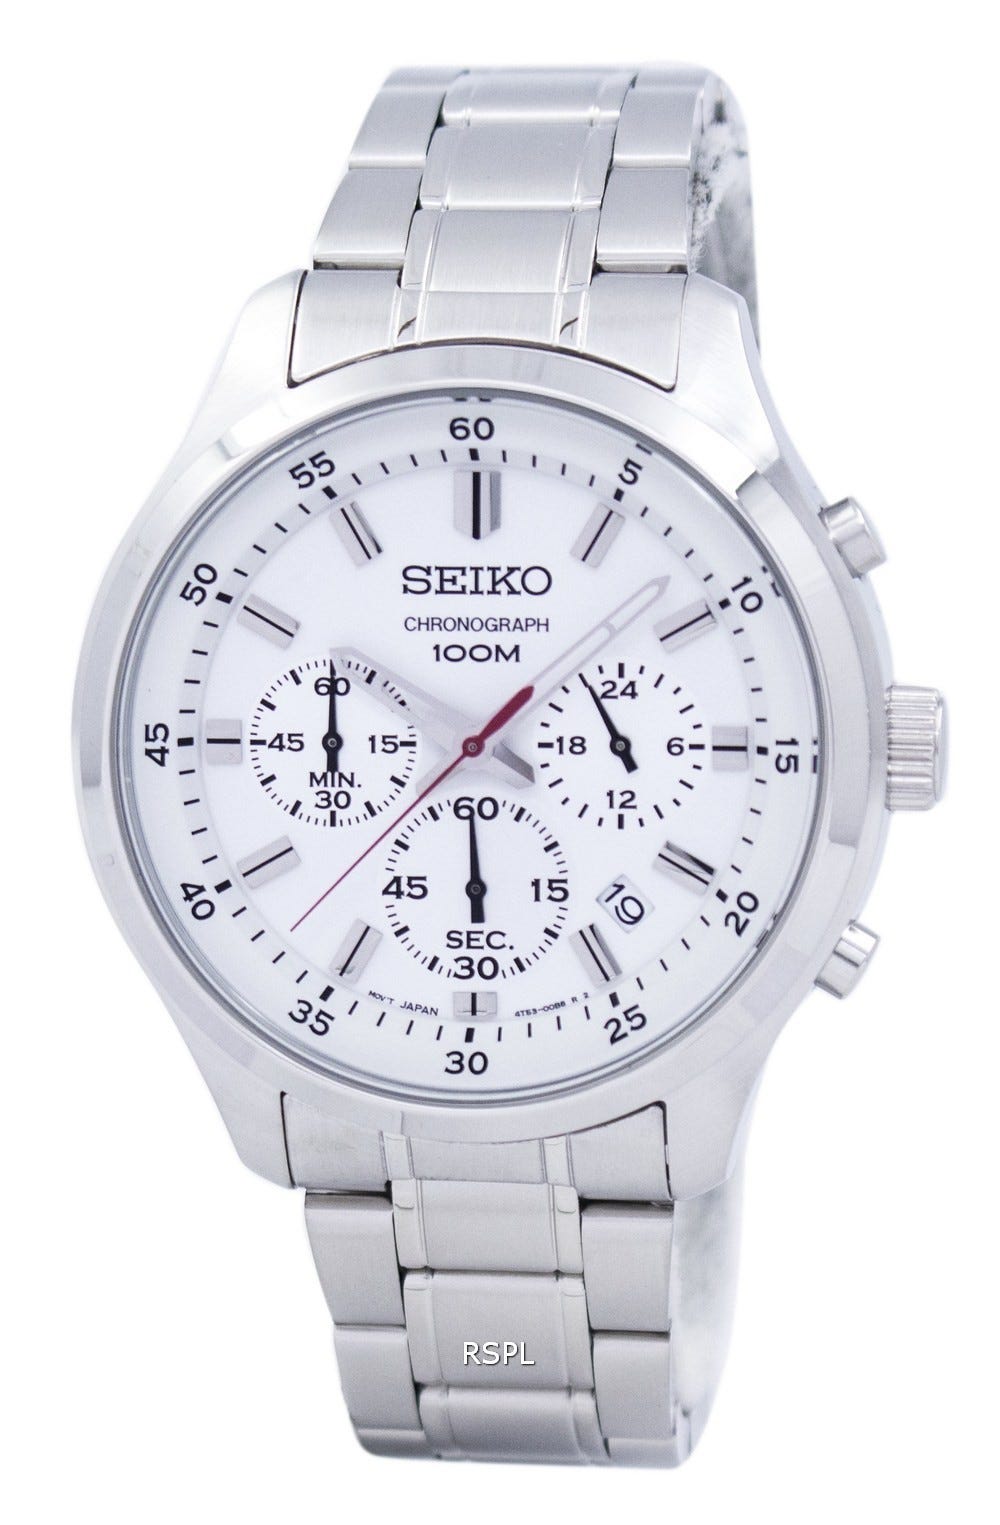 Seiko Chronograph Quartz SKS583 SKS583P1 SKS583P Men's Watch: Bold and  sporty with the right curves at the right places | by City Watches FR |  Medium